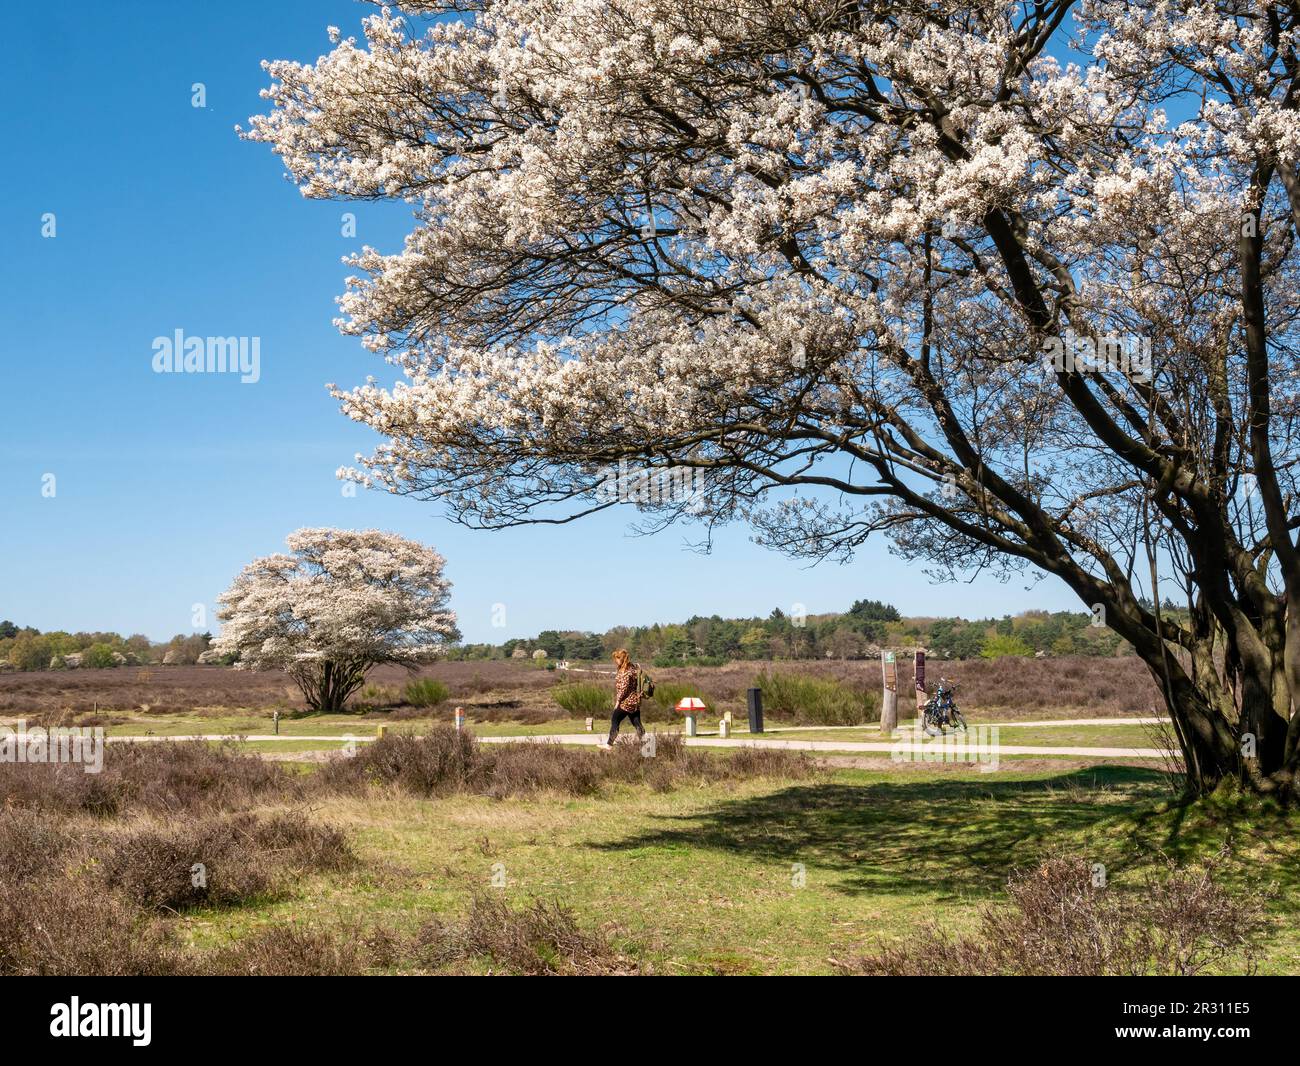 People walking and riding bicycles, blooming juneberry trees, Amelanchier lamarkii, in Zuiderheide nature reserve, Het Gooi, Netherlands Stock Photo